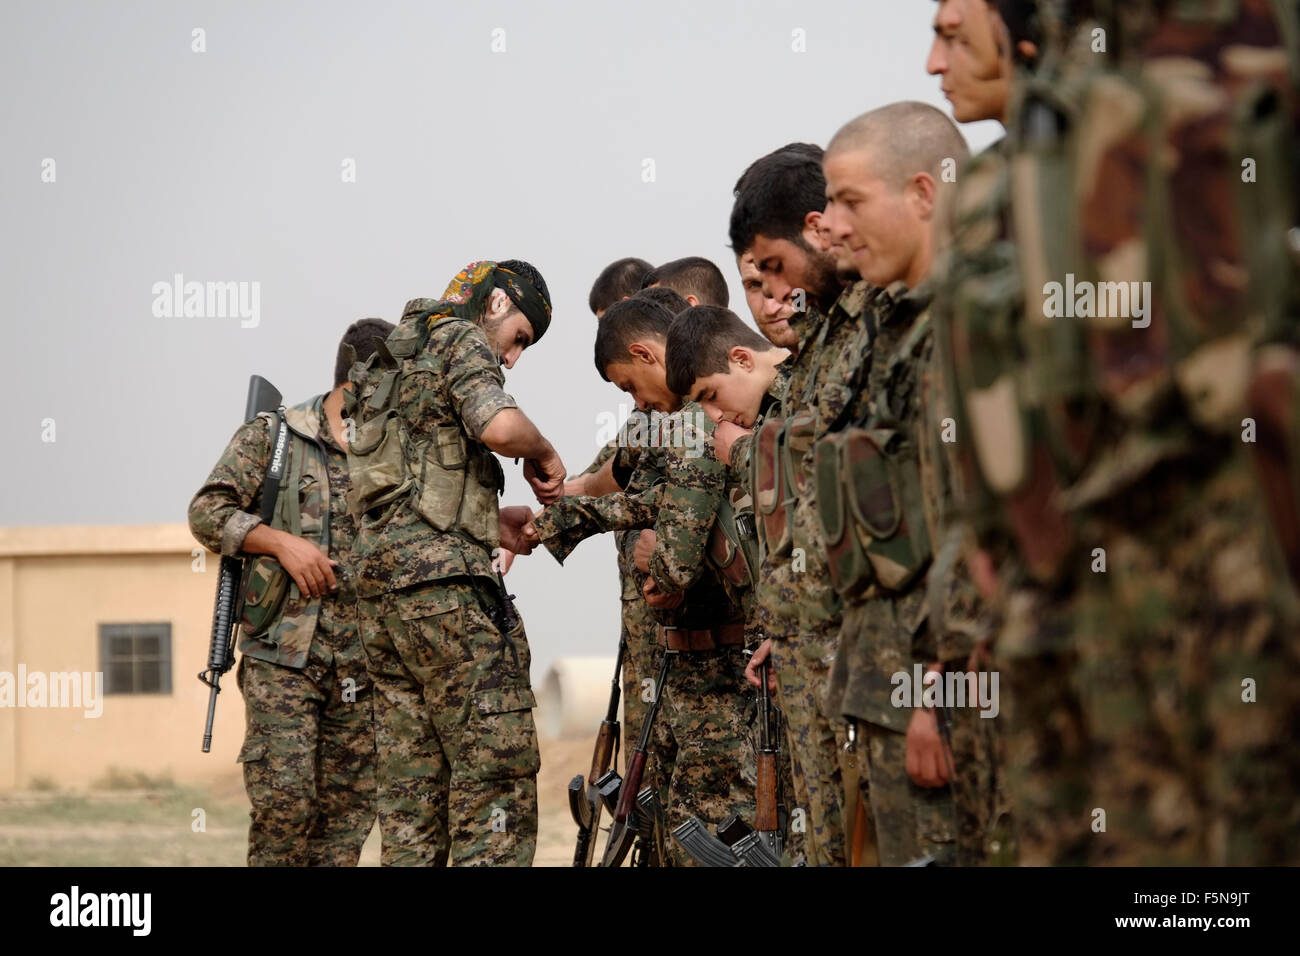 Kurdish fighters of the People's Protection Units YPG taking part in a recruitment ceremony in Al Hasakah or Hassakeh district in northern Syria Stock Photo